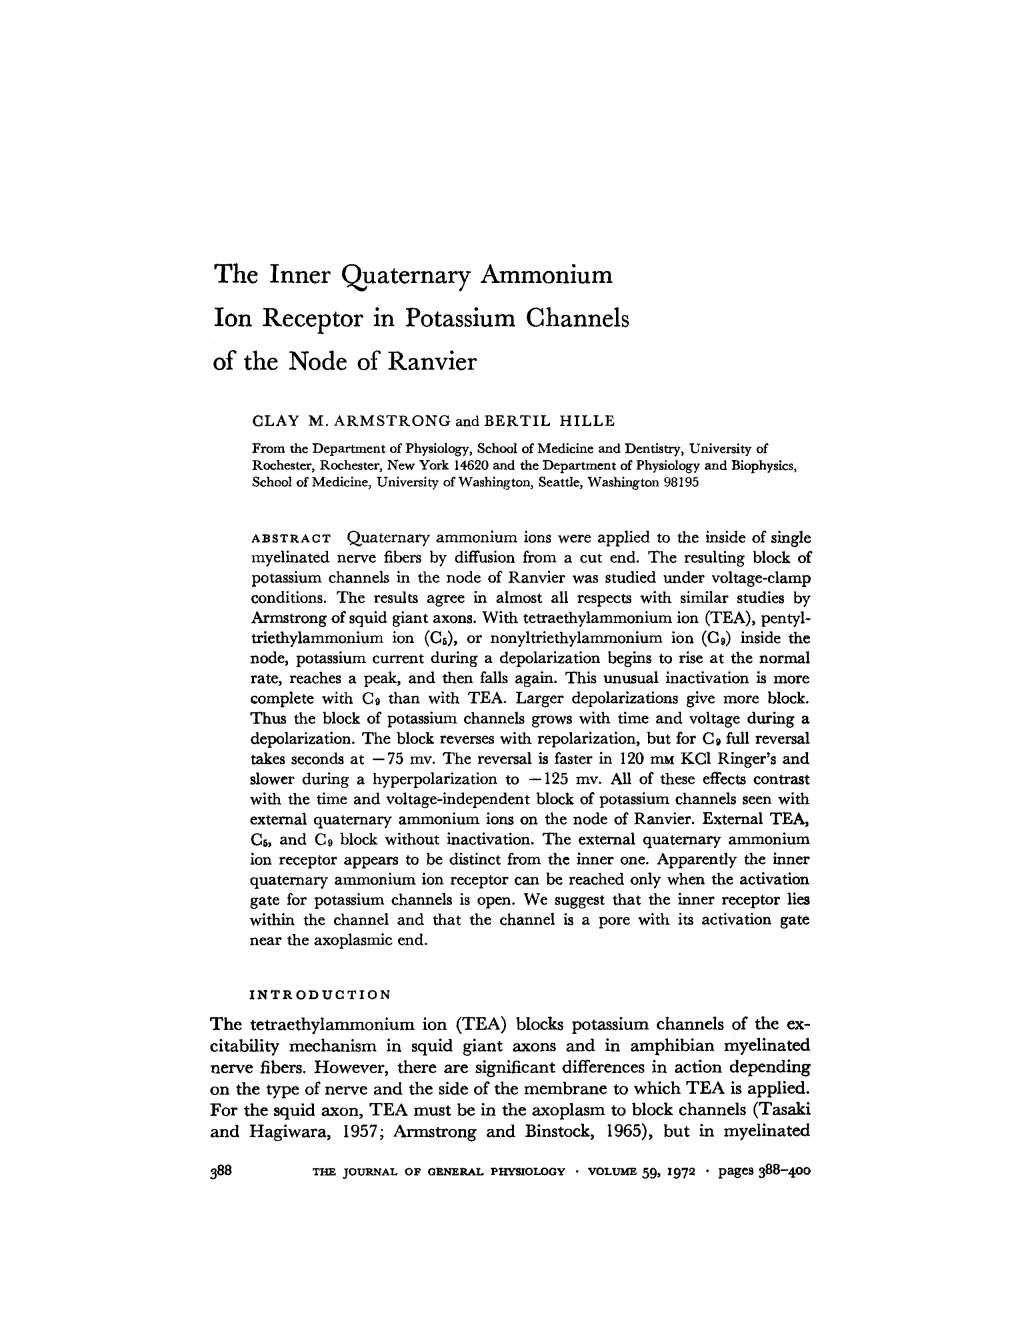 The Inner Quaternary Ammonium Ion Receptor in Potassium Channels of the Node of Ranvier